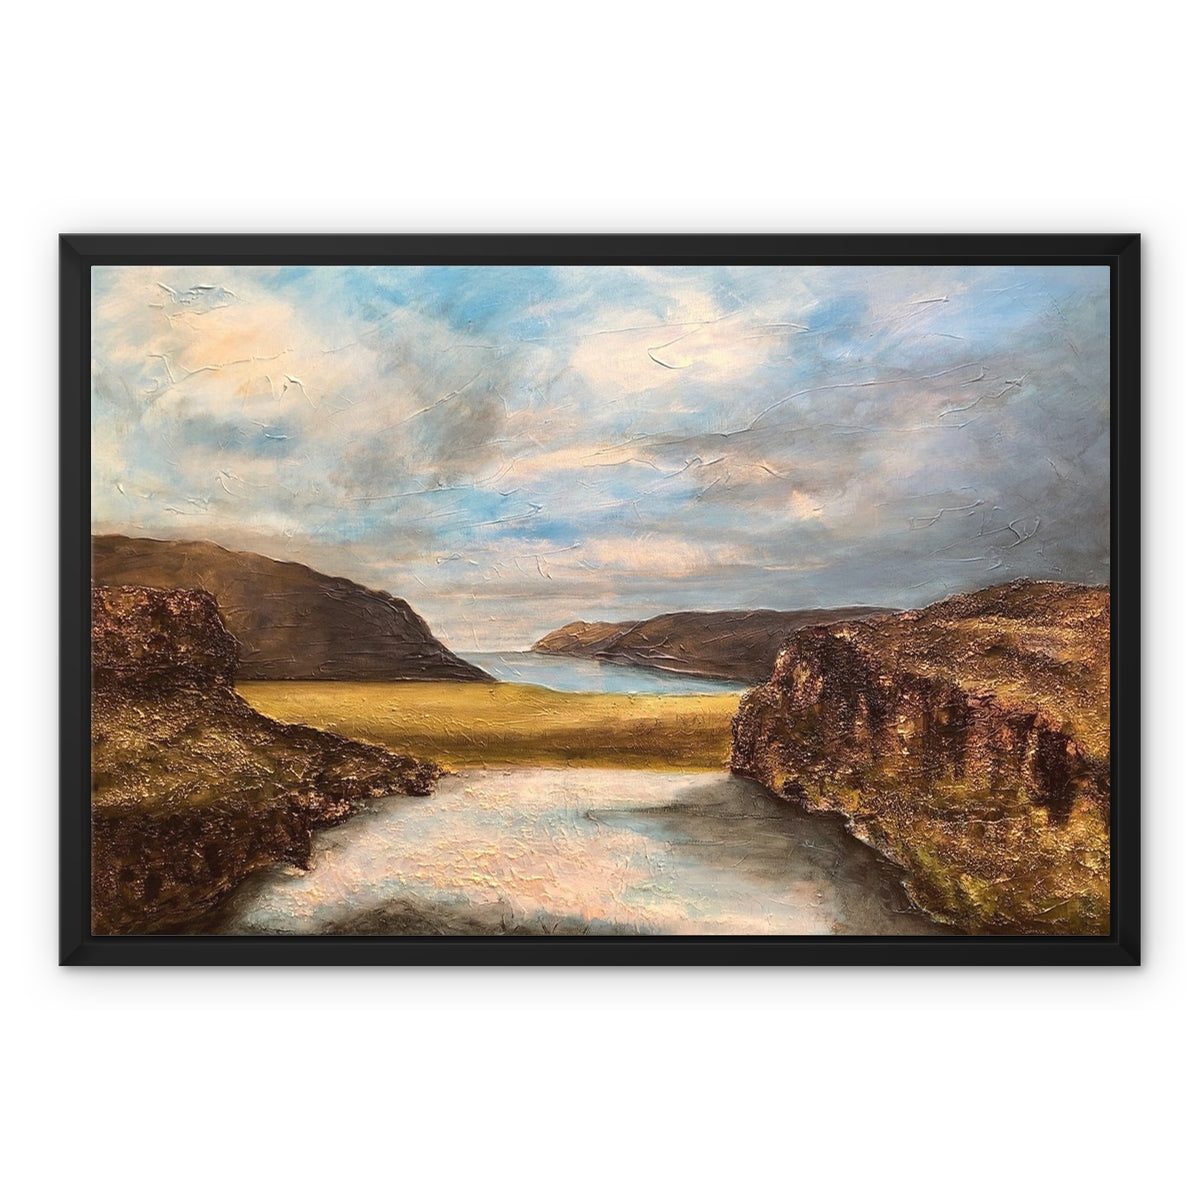 Westfjords Iceland Painting | Framed Canvas From Scotland-Floating Framed Canvas Prints-World Art Gallery-24"x18"-Paintings, Prints, Homeware, Art Gifts From Scotland By Scottish Artist Kevin Hunter